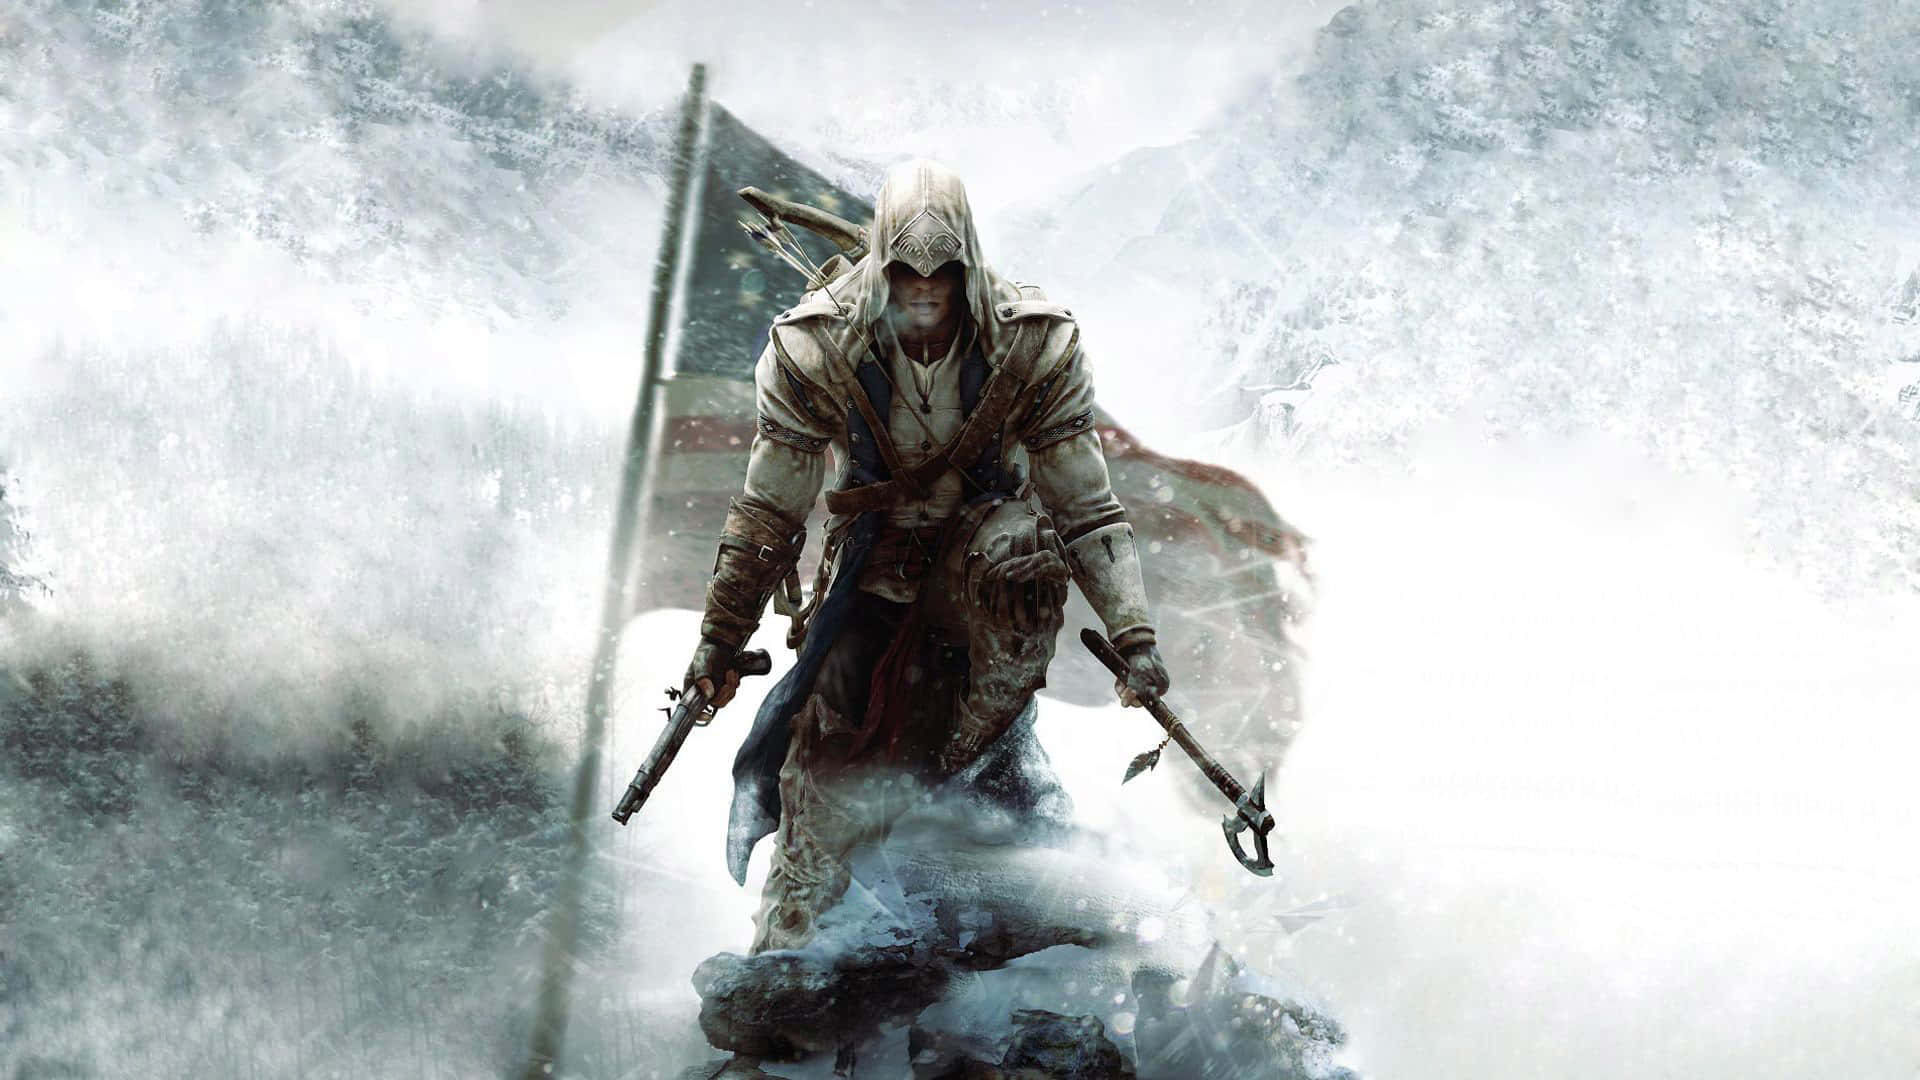 Desmond Miles in Action - Assassin's Creed Wallpaper